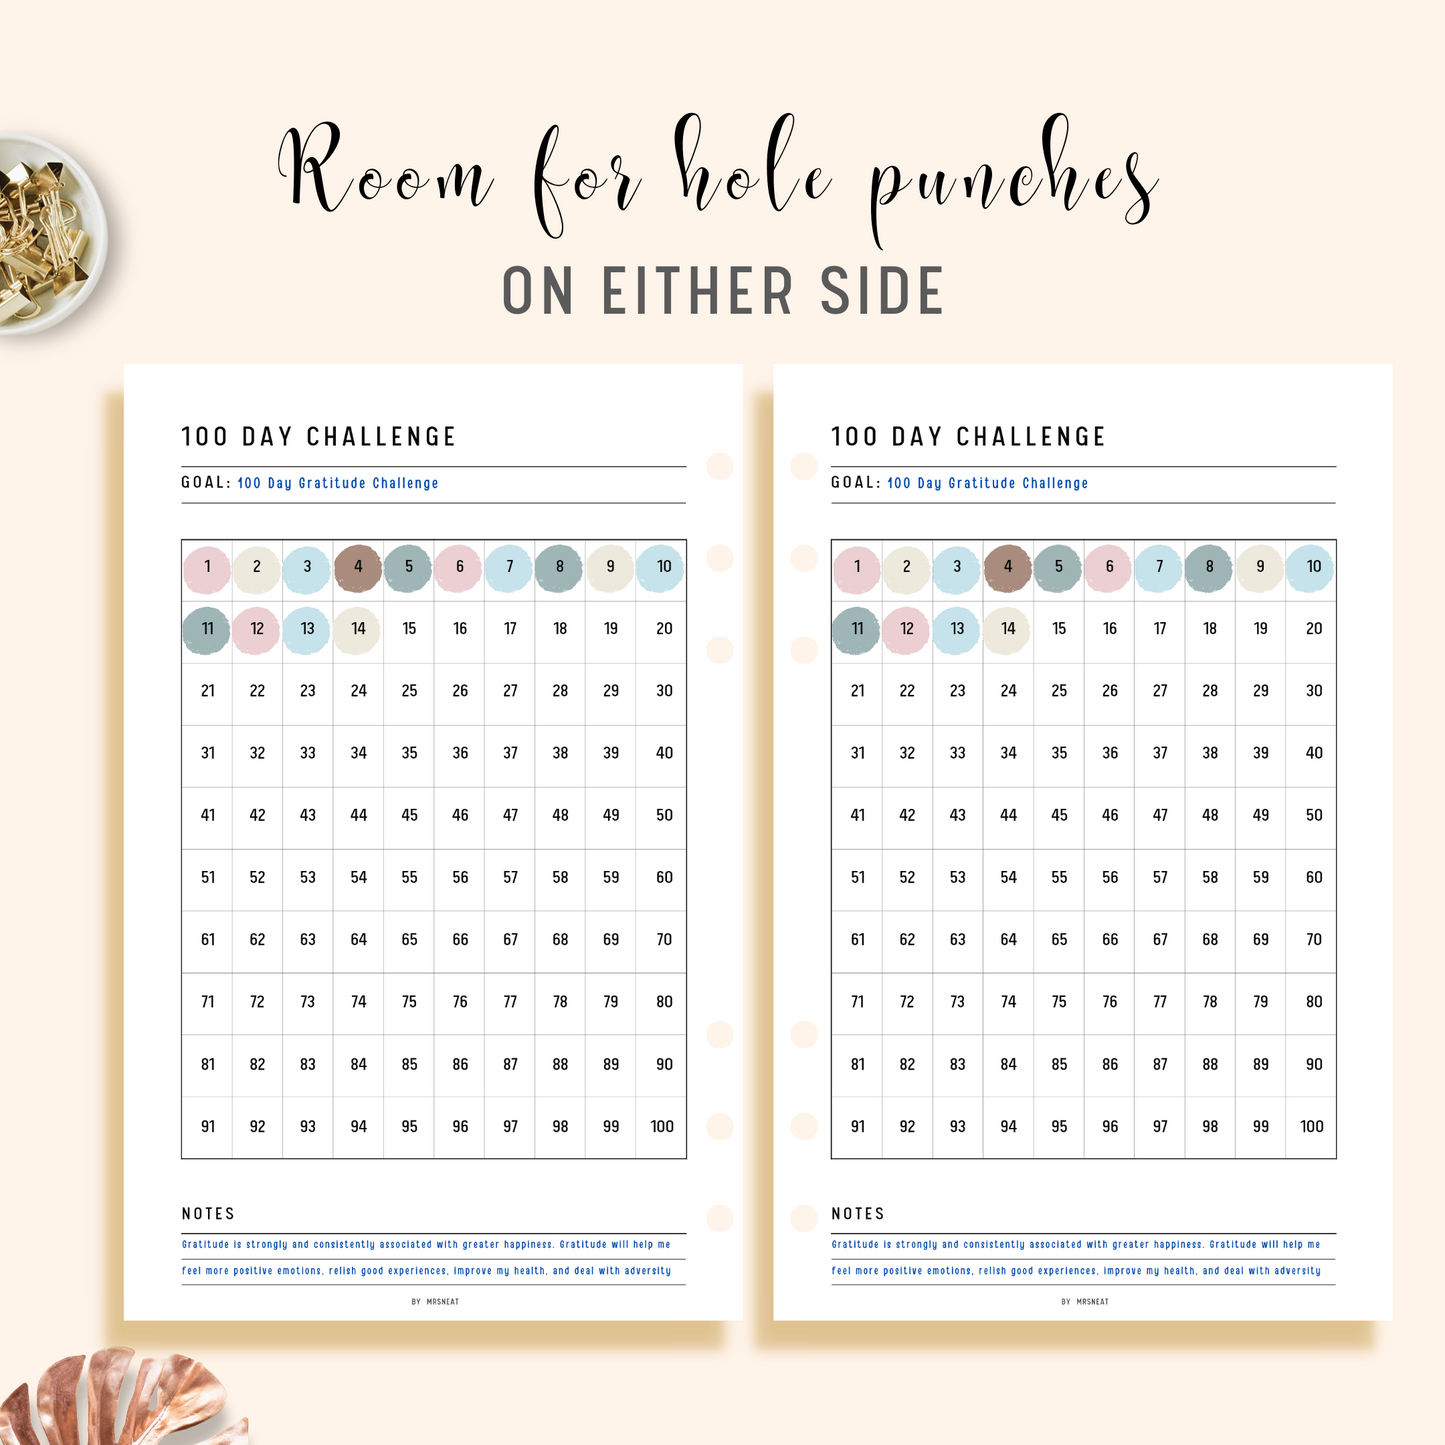 100 Day Challenge Habit Tracker Printable Planner with room for hole punches on either side